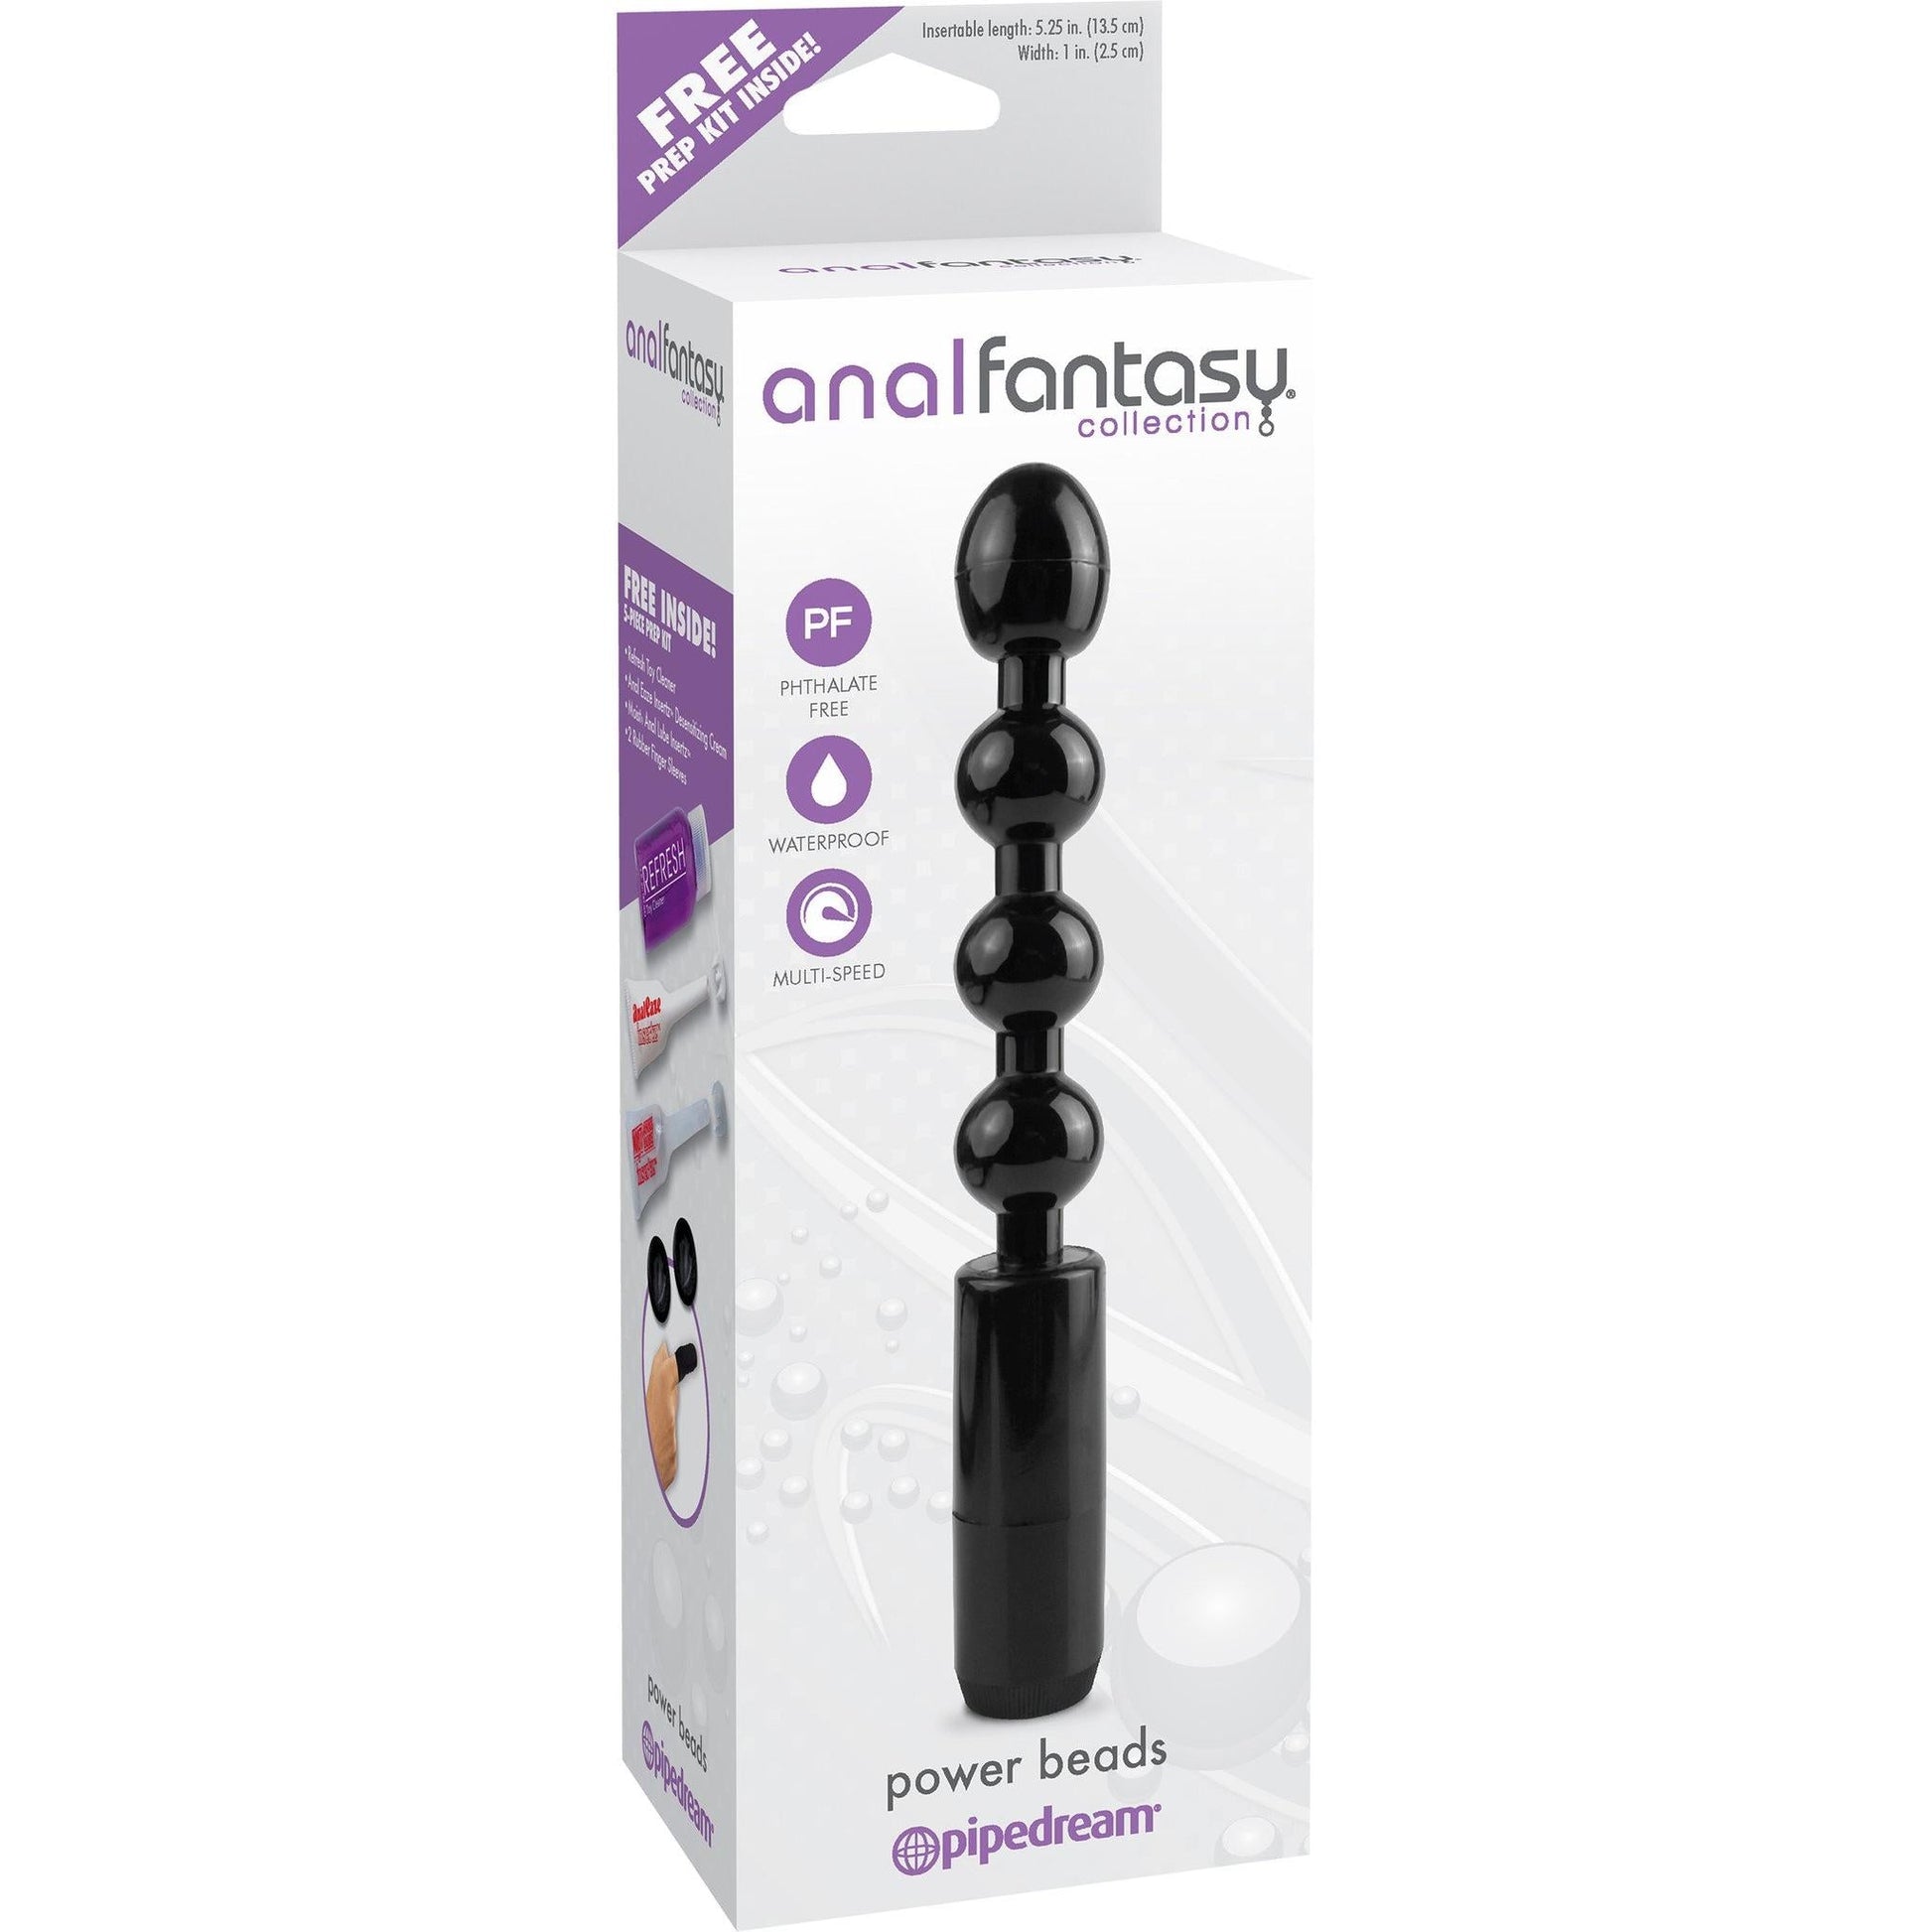 Anal Fantasy Collection Beginners Power Beads